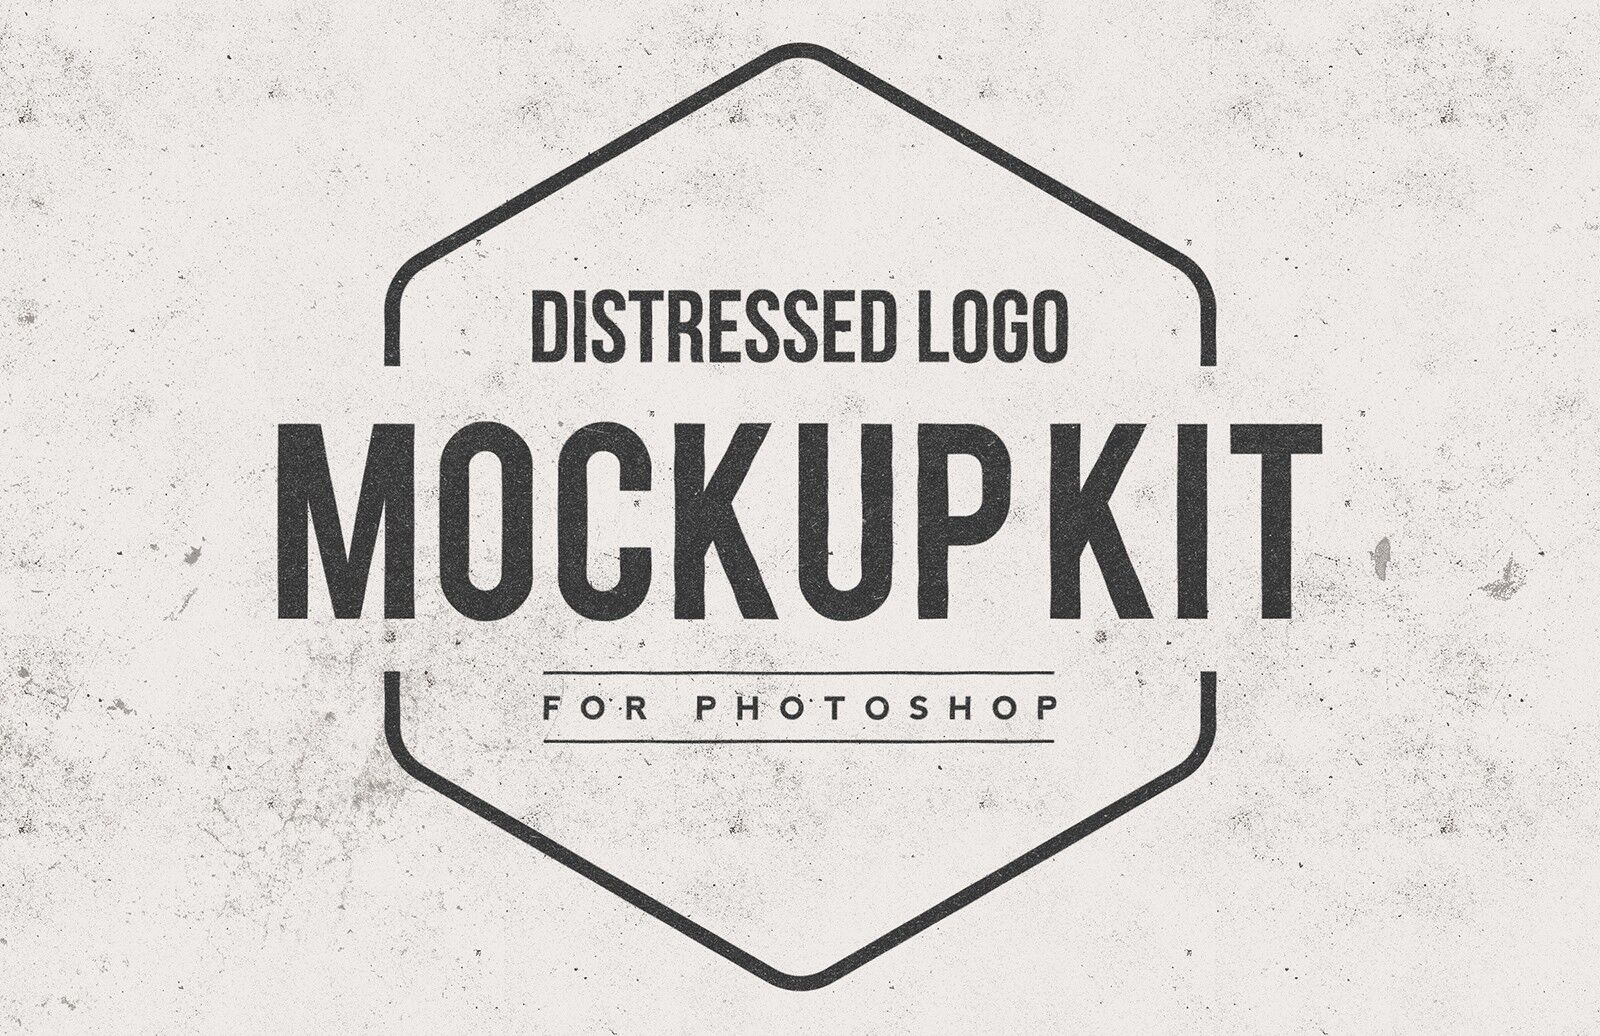 Mockup of a Set of Distressed and Grungy Logos FREE PSD